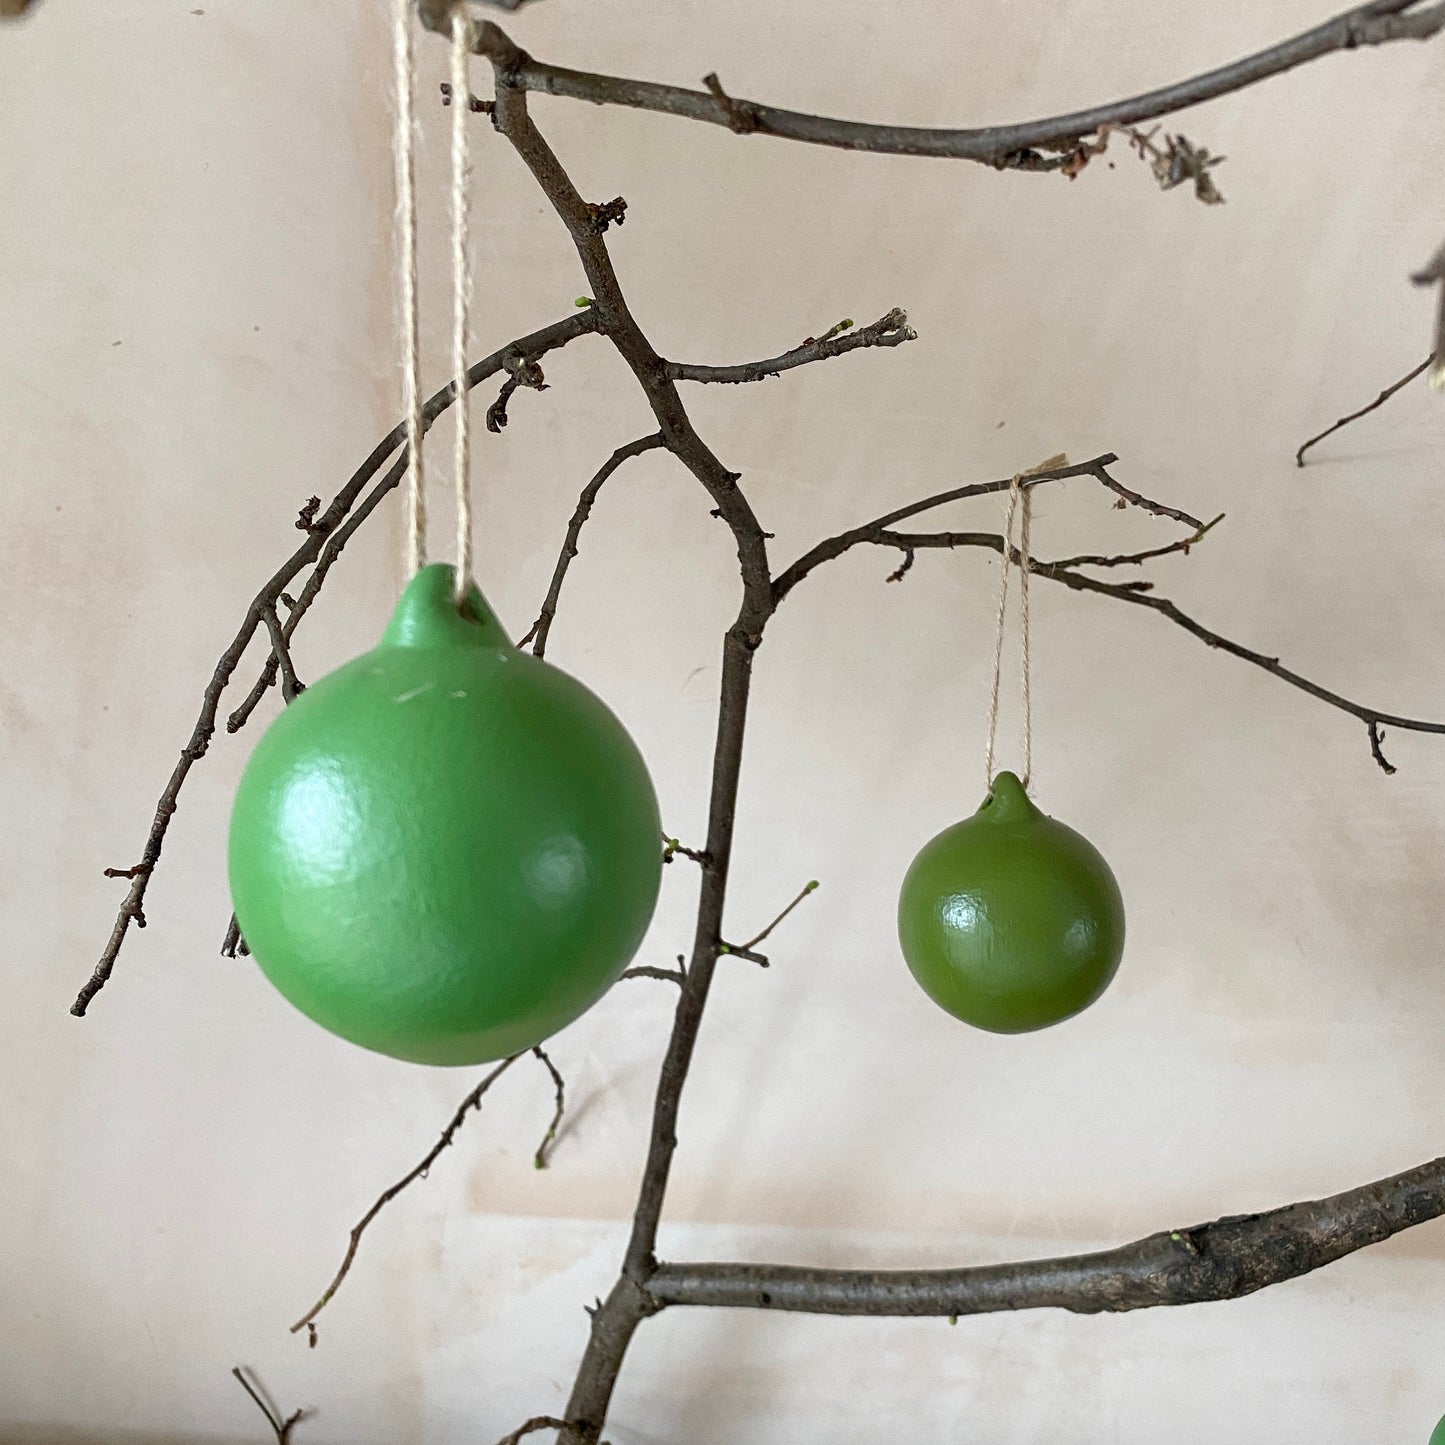 Set of 6 Green Ceramic Baubles - Ceramic Ornament - Christmas Tree Decoration - Hand Painted - Green Tones Baubles - Forest Baubles - 6cm